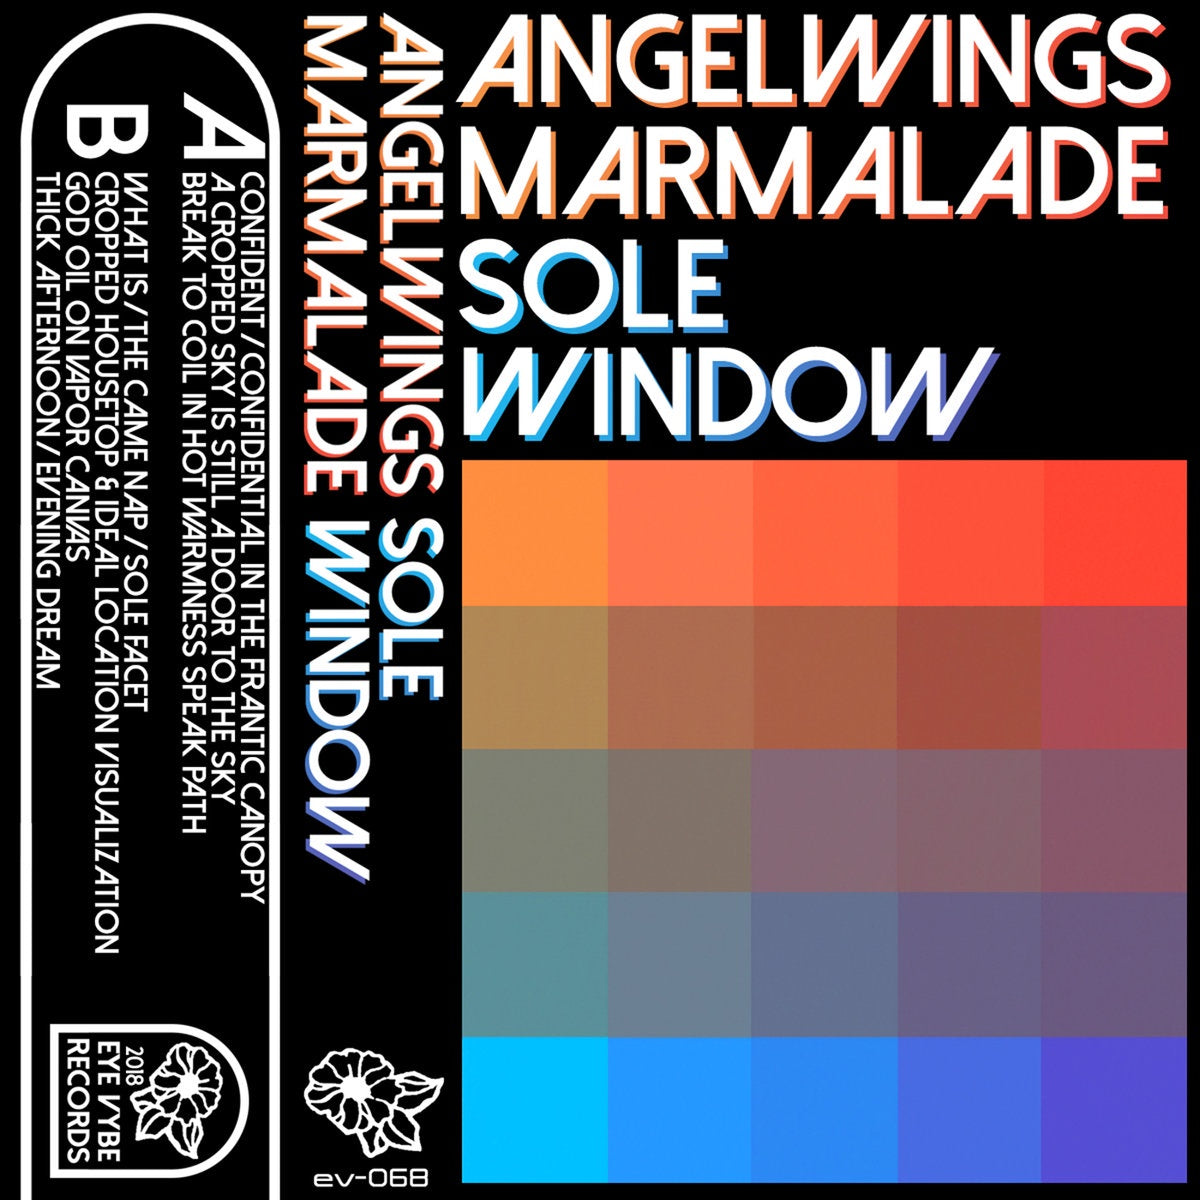 Angelwings Marmalade - Sole Window - New Cassette 2018 Eye Vybe Limited Edition Blue Tape - Experimental / Avant Garde / Psychedelic / Space Rock